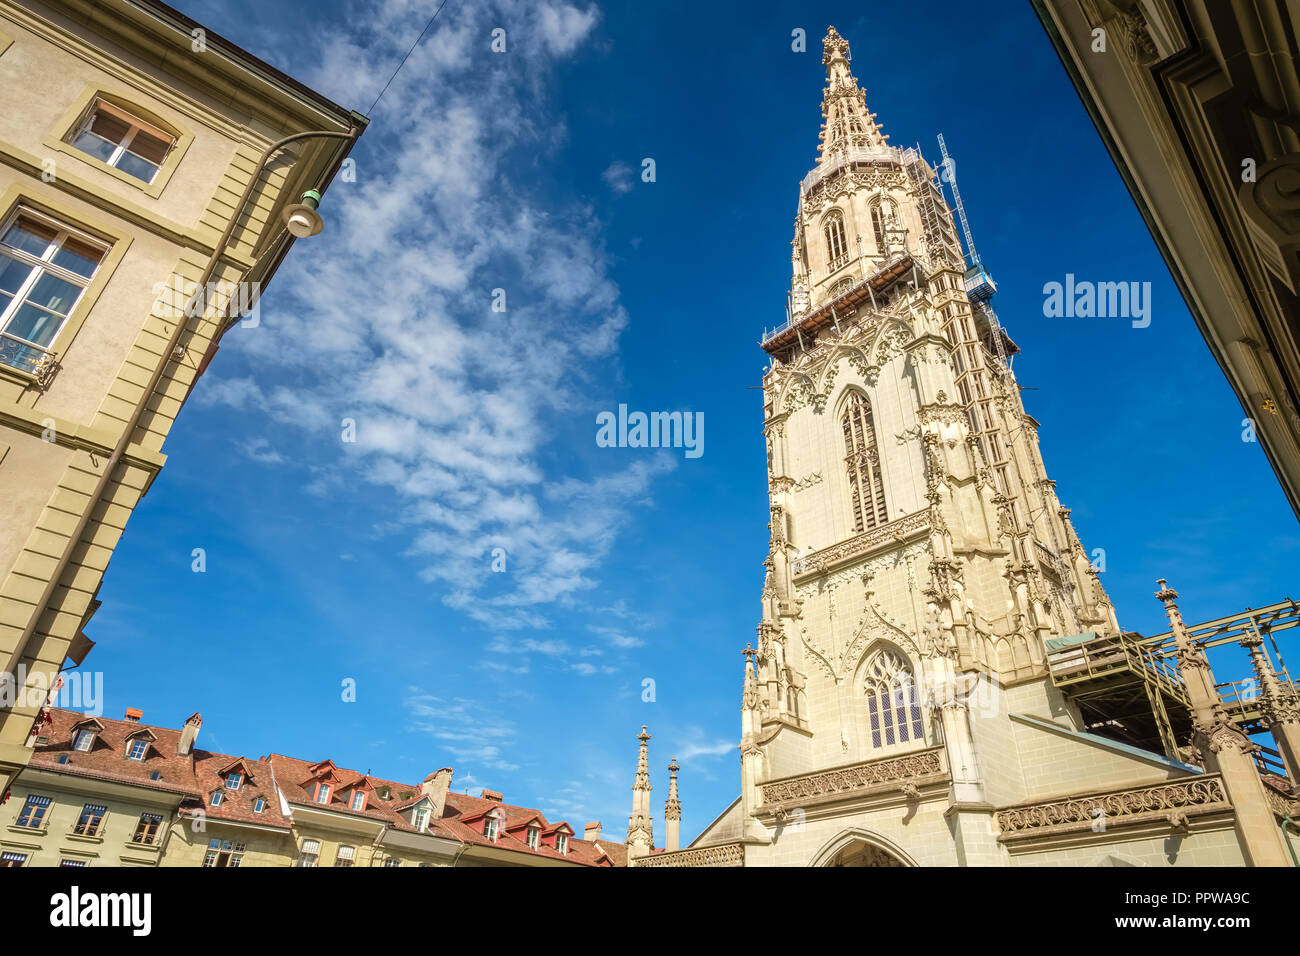 Bern, Switzerland - September 16, 2015: The famous Munster Cathedral towering over streets and houses in Bern. It is the highest tower of Switzerland Stock Photo